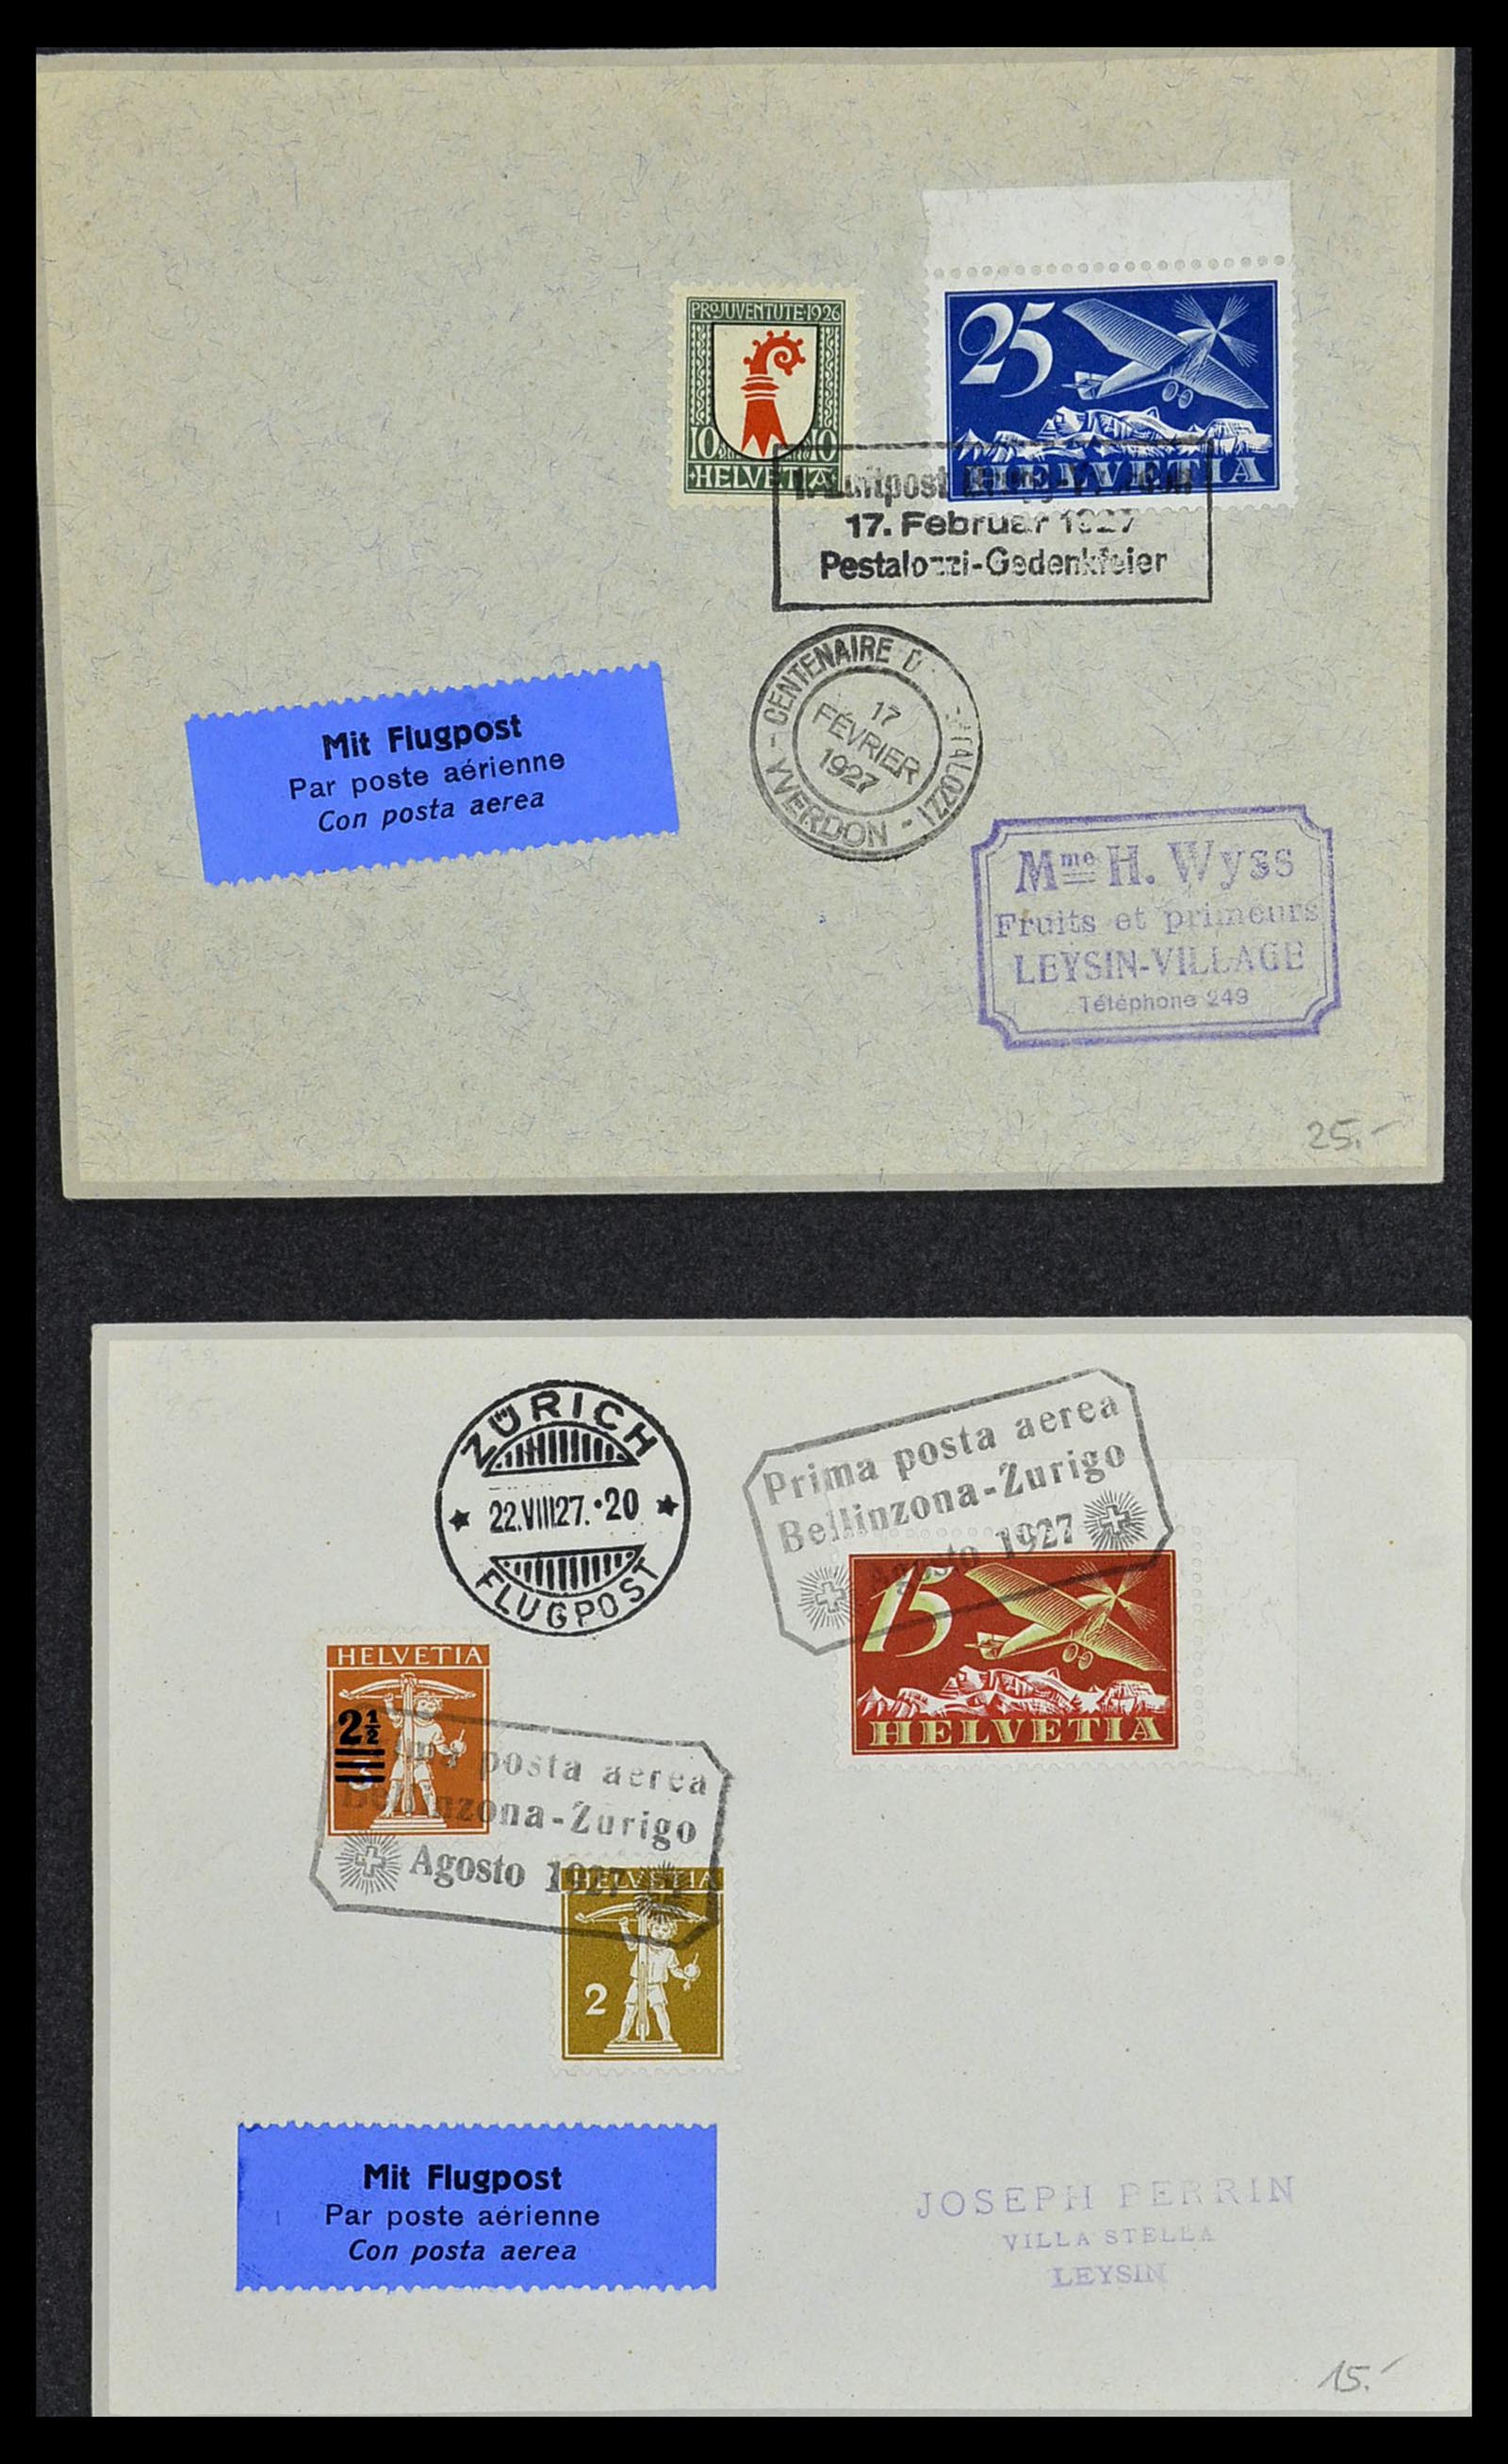 34141 100 - Stamp collection 34141 Switzerland airmail covers 1920-1960.